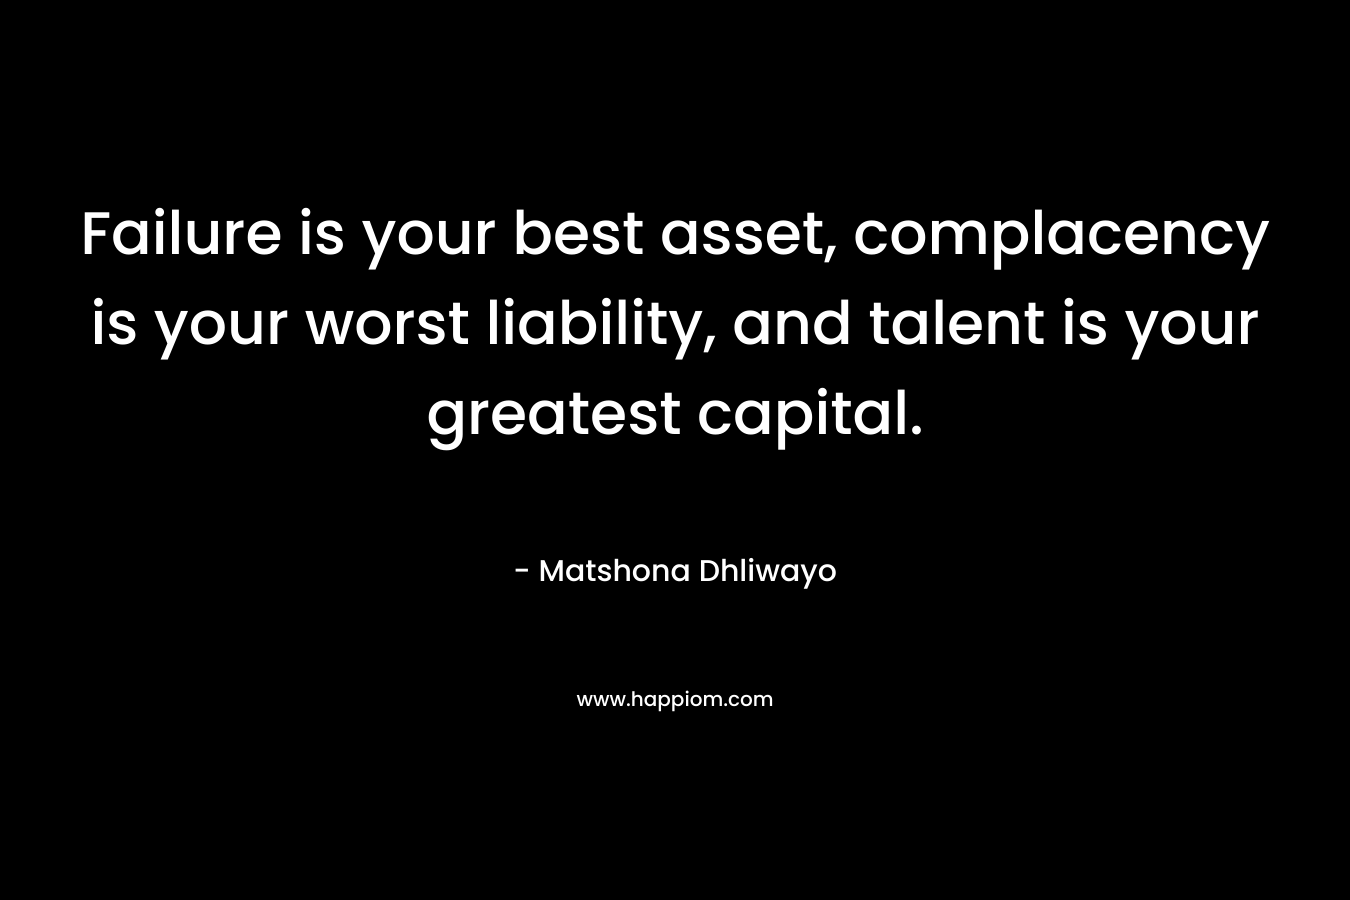 Failure is your best asset, complacency is your worst liability, and talent is your greatest capital. – Matshona Dhliwayo